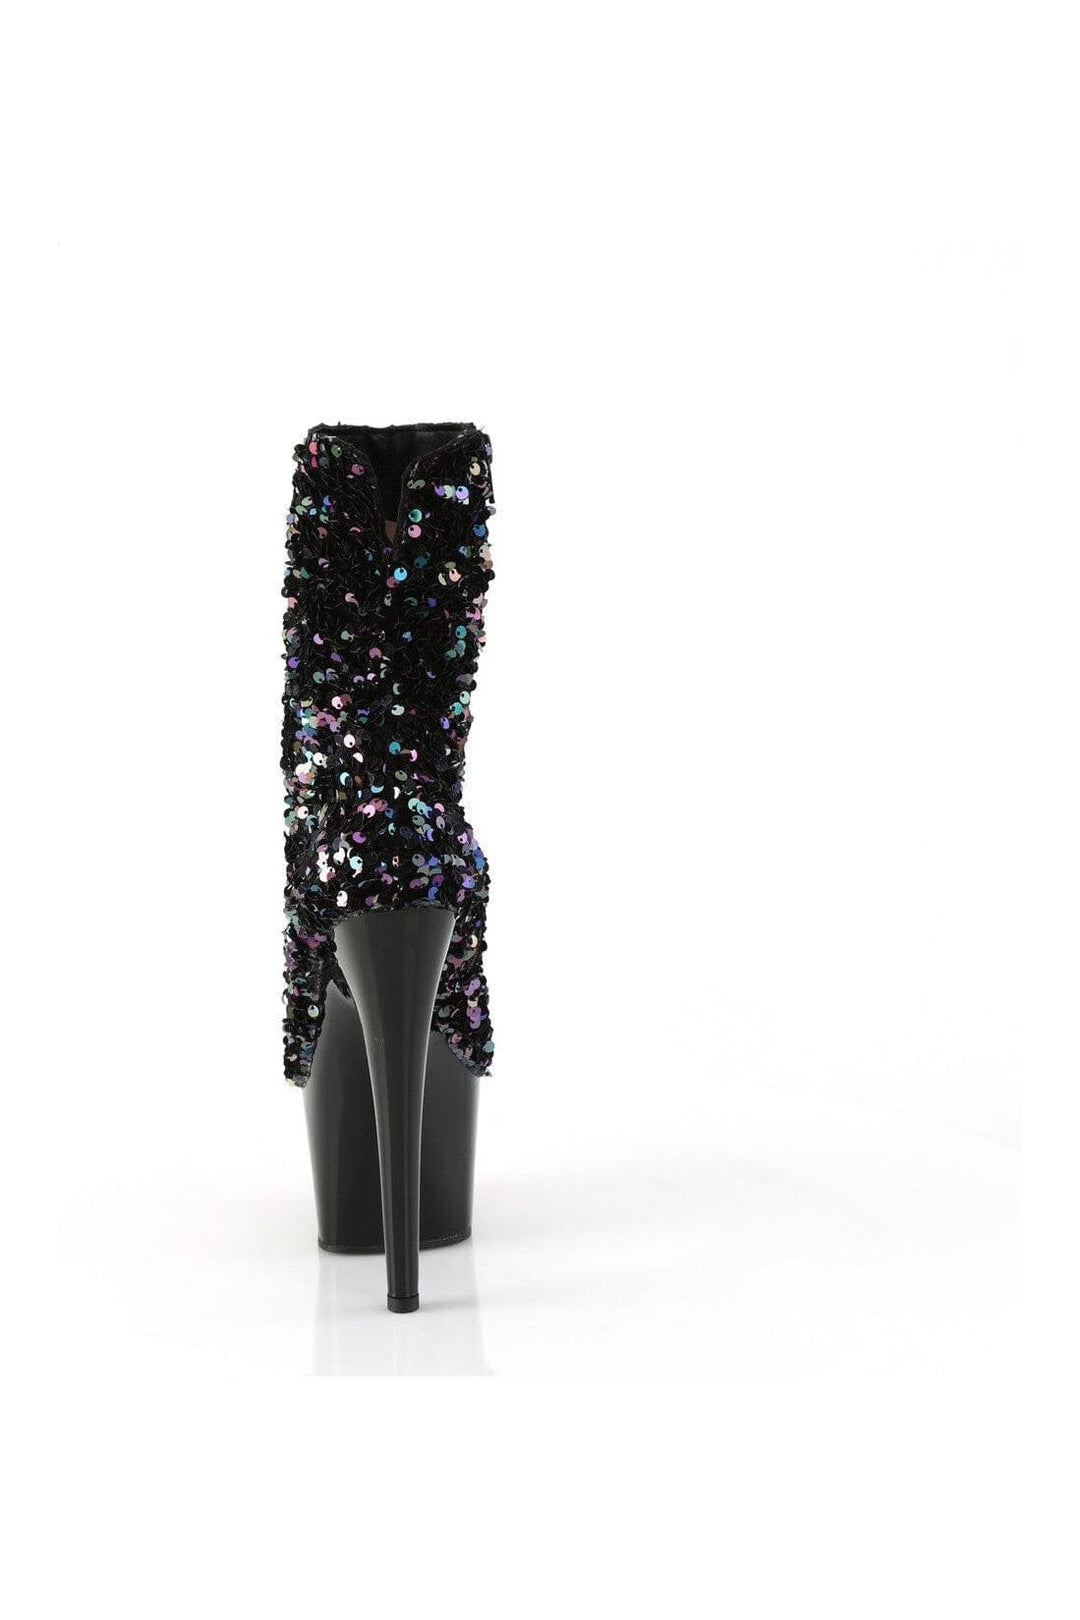 ADORE-1042SQ Black Sequins Ankle Boot